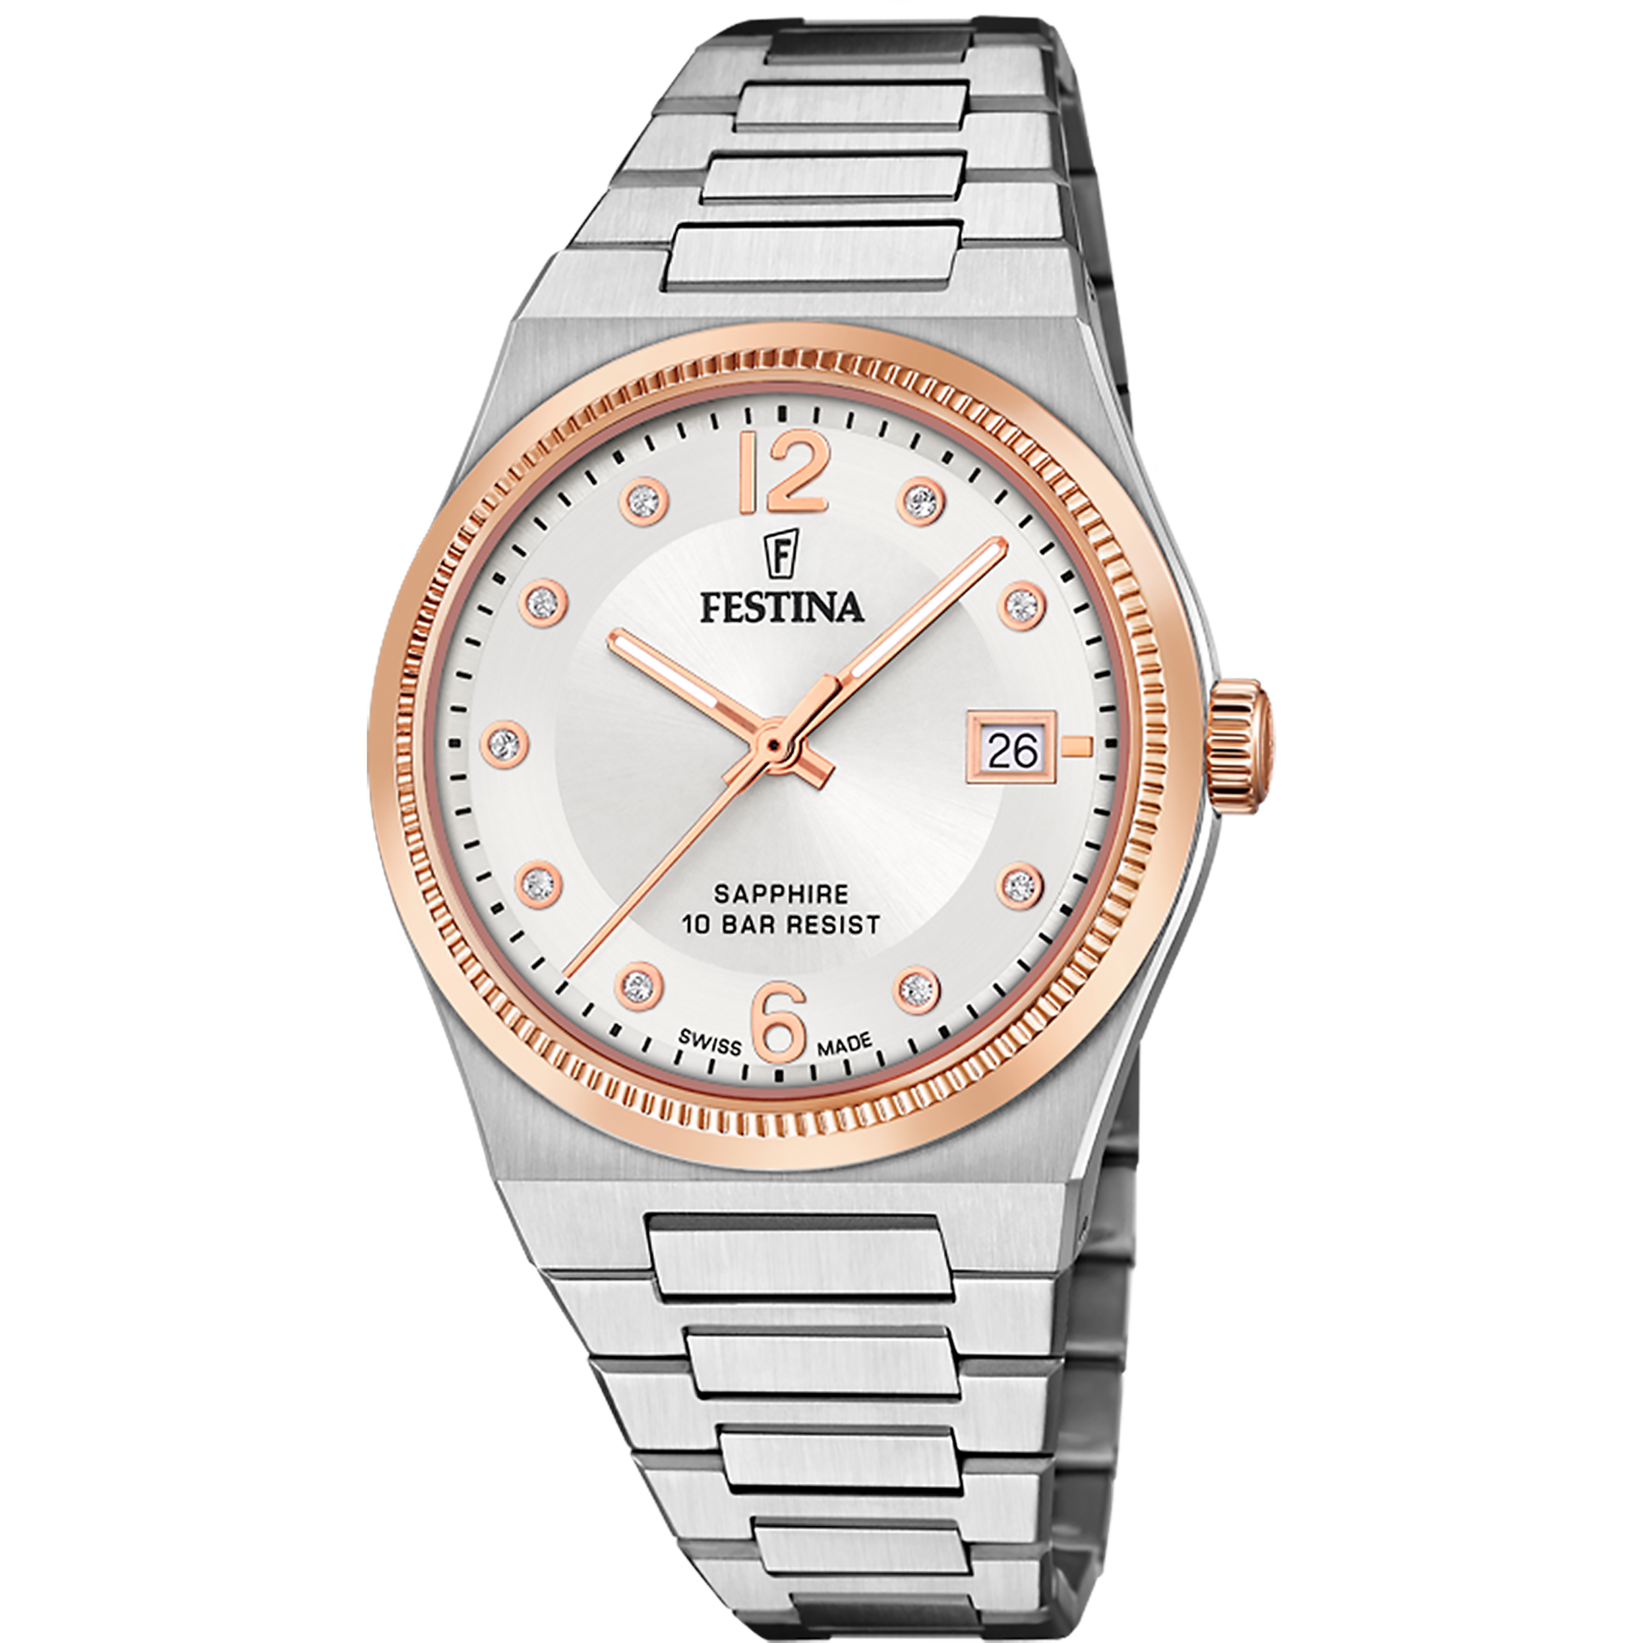 Festina Swiss Made F20037-1 - Analog - Strap Material Stainless Steel I Festina Watches USA